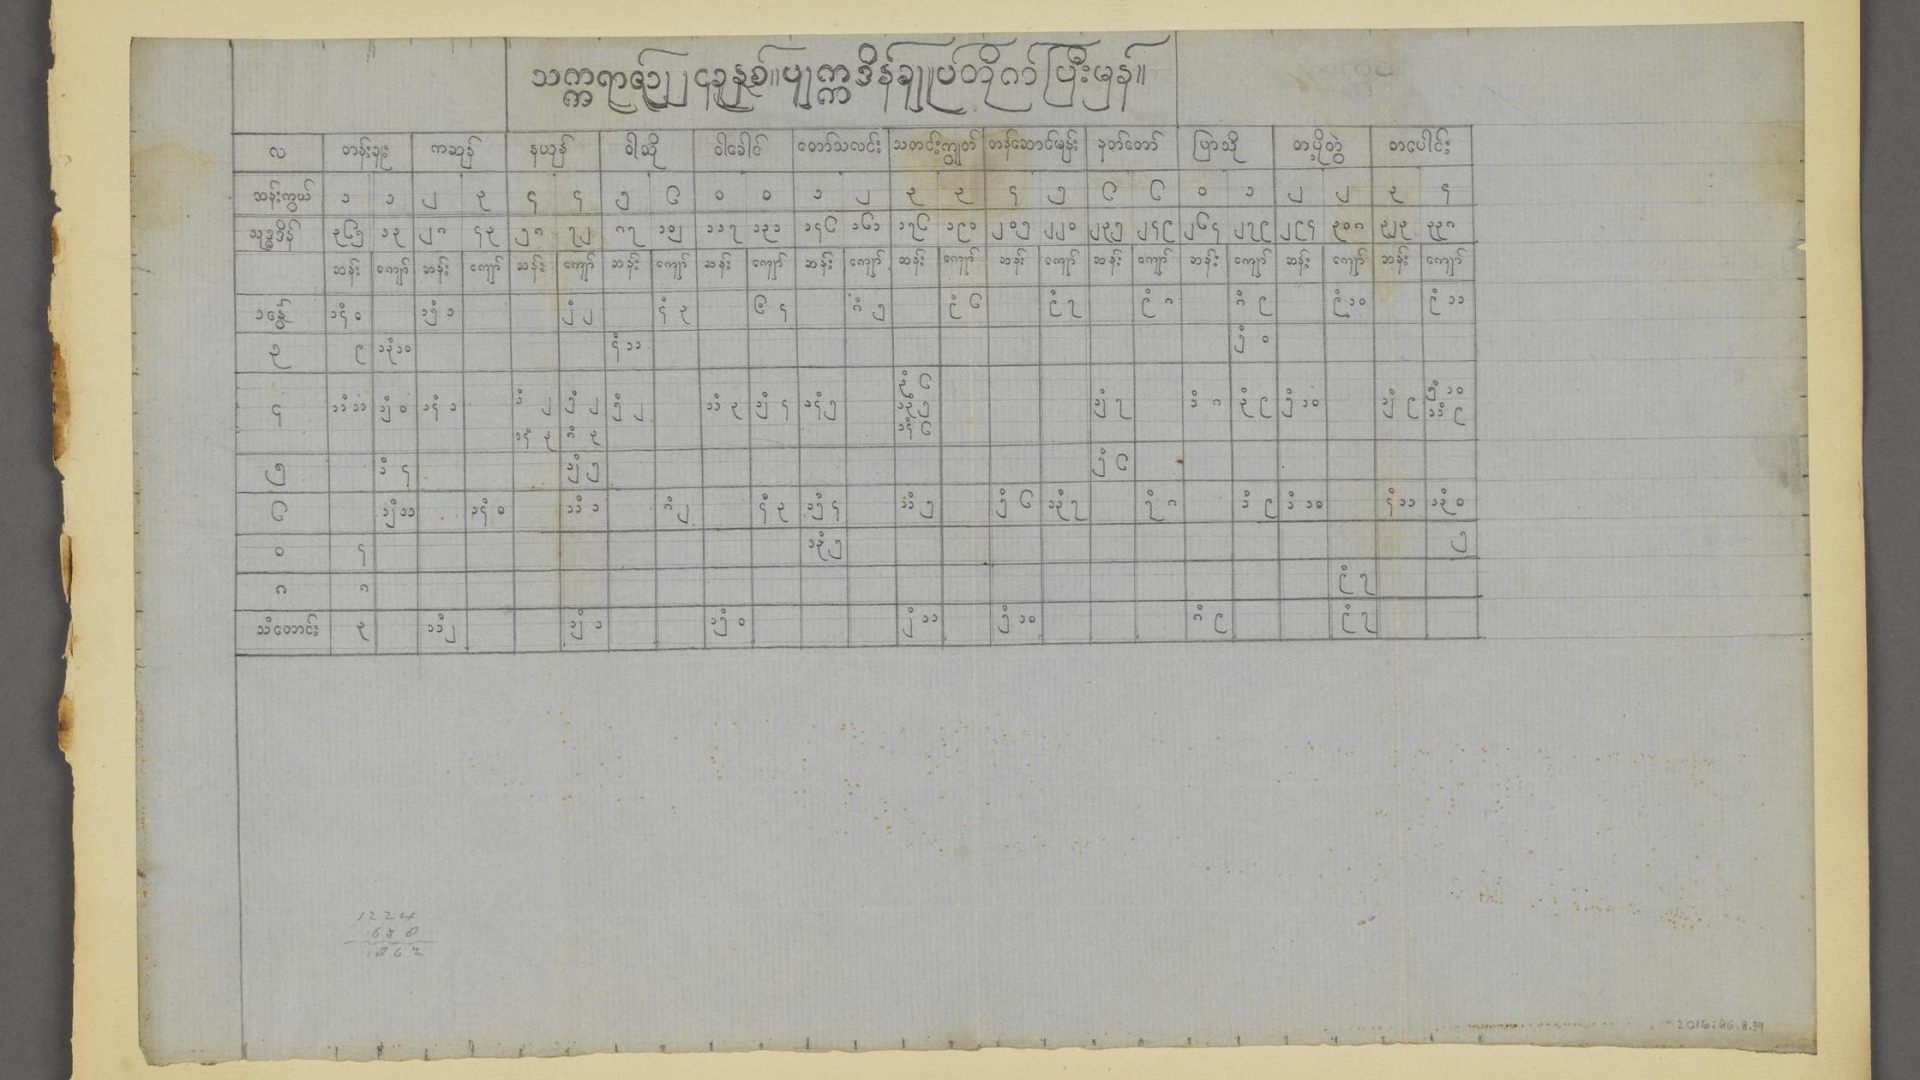 Lunar calendar from Burma (now called Myanmar) from the year 1224.